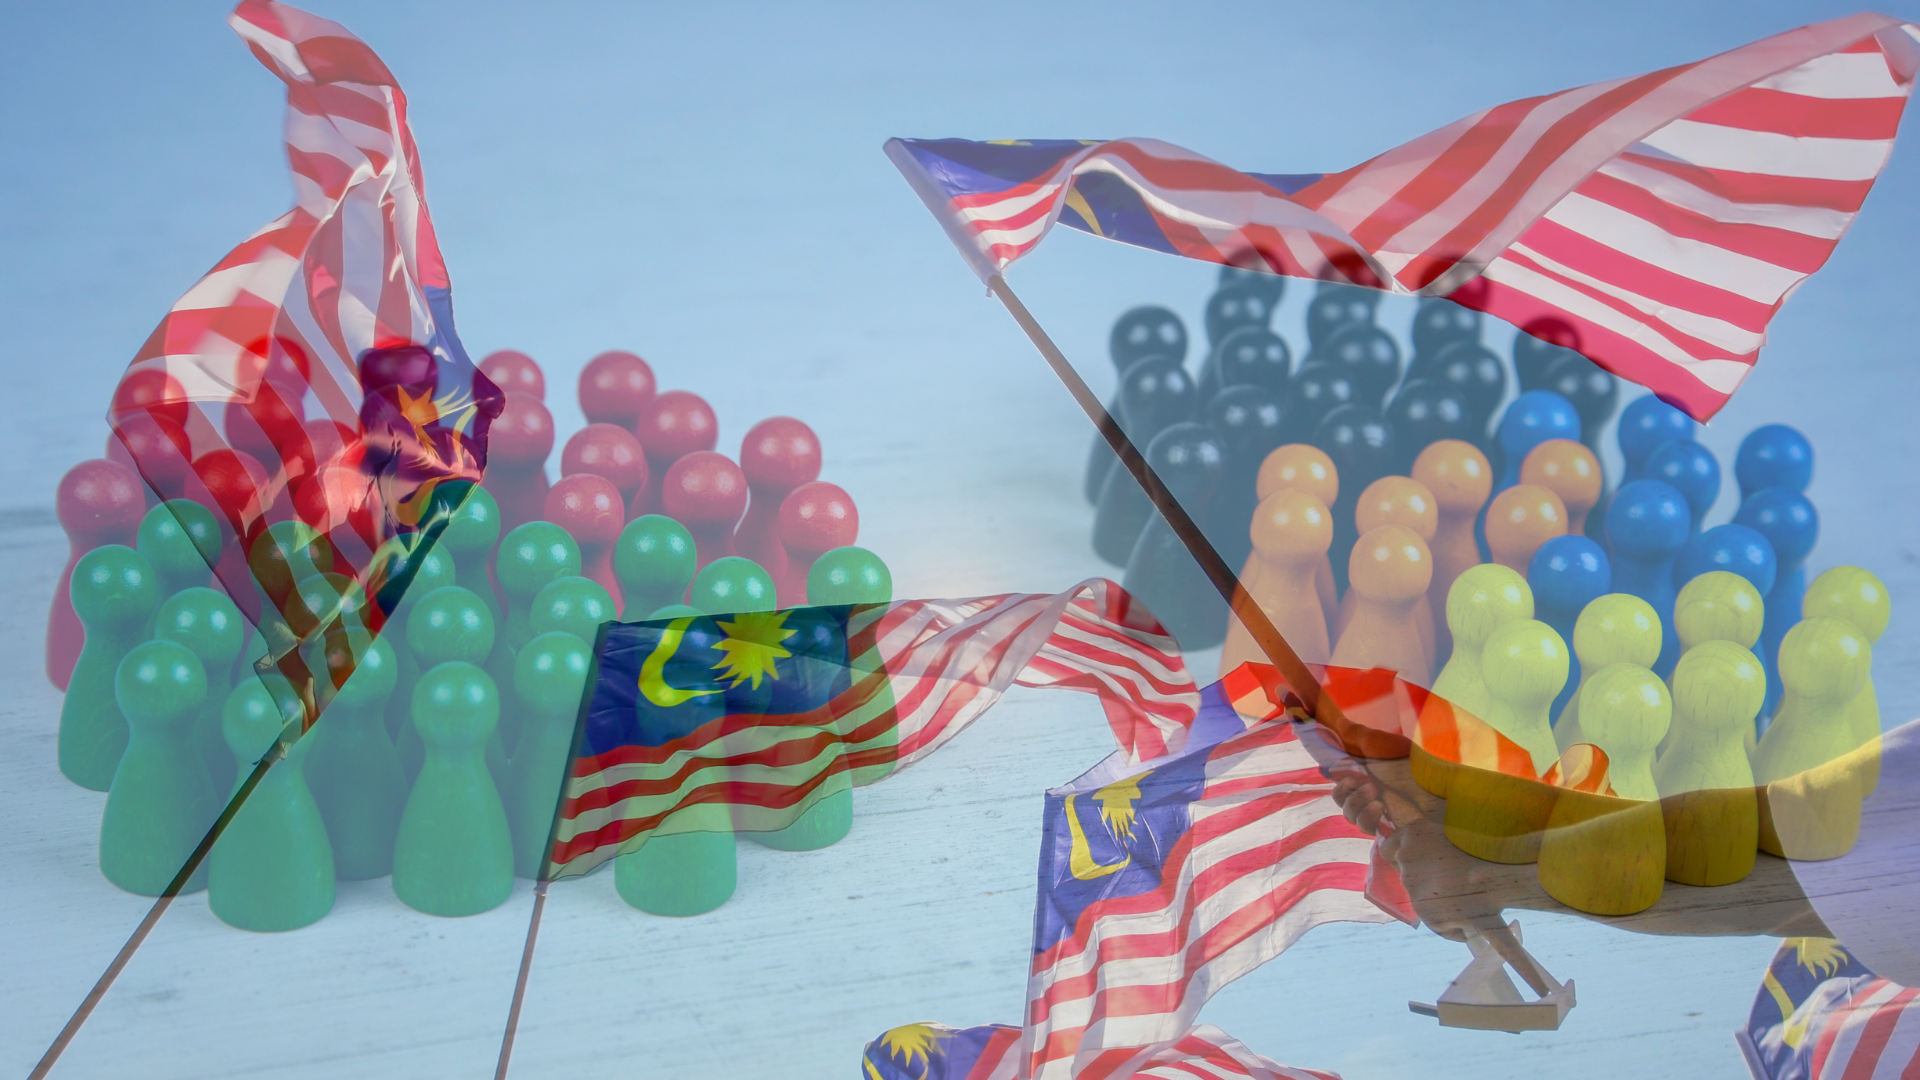 [ADRN Working Paper] Malaysia’s Ongoing Tussle With Democracy